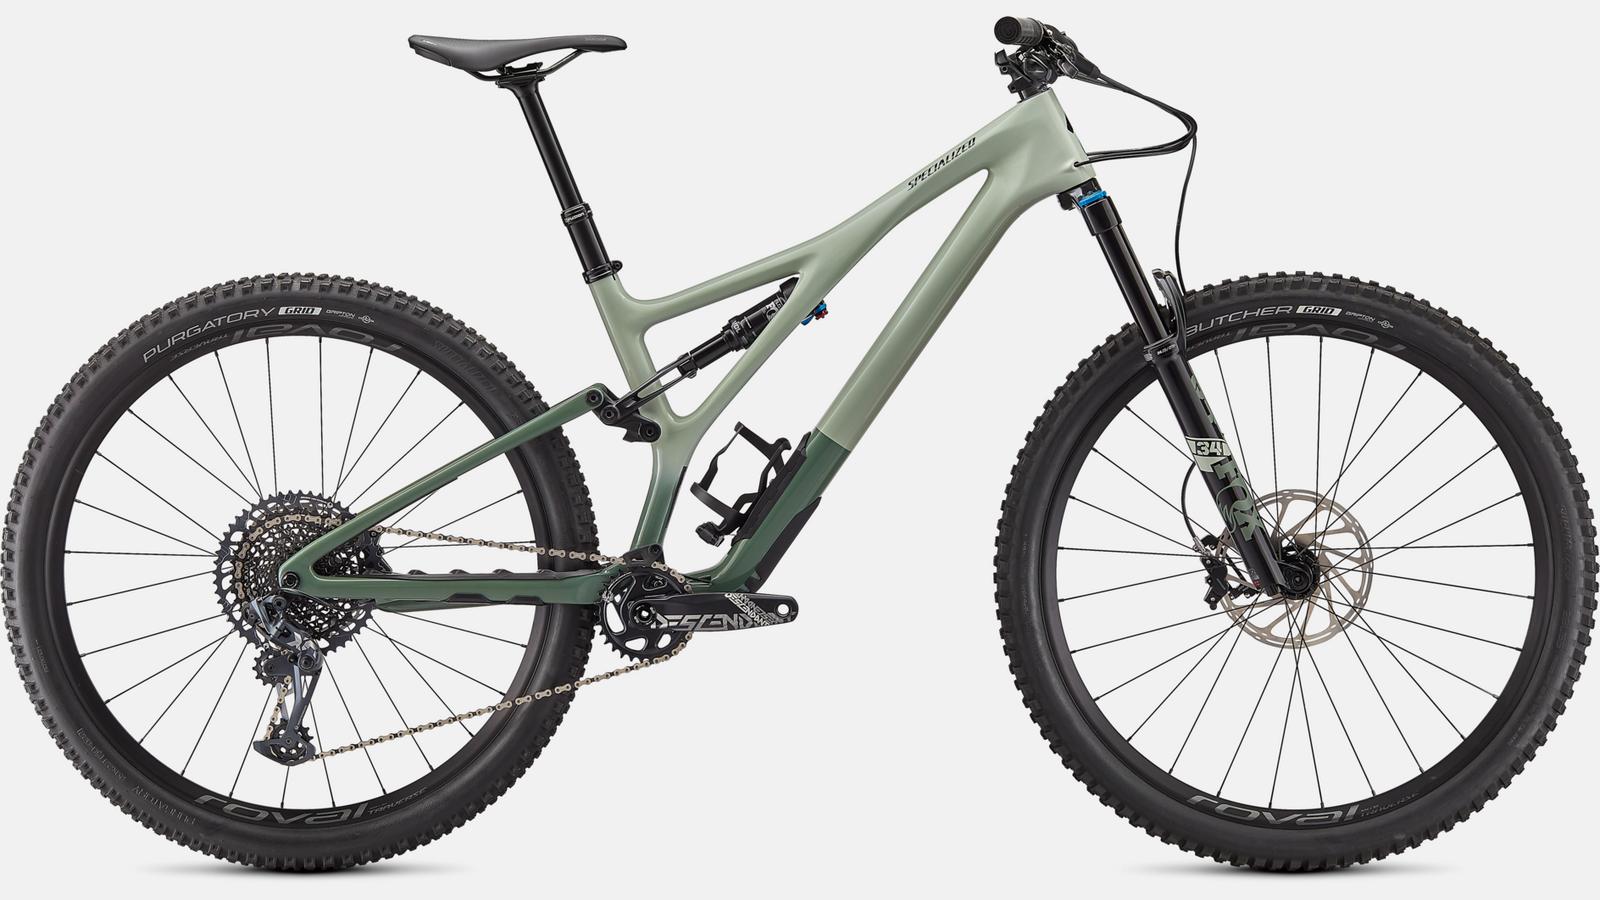 Paint for 2021 Specialized Stumpjumper Expert - Gloss Spruce